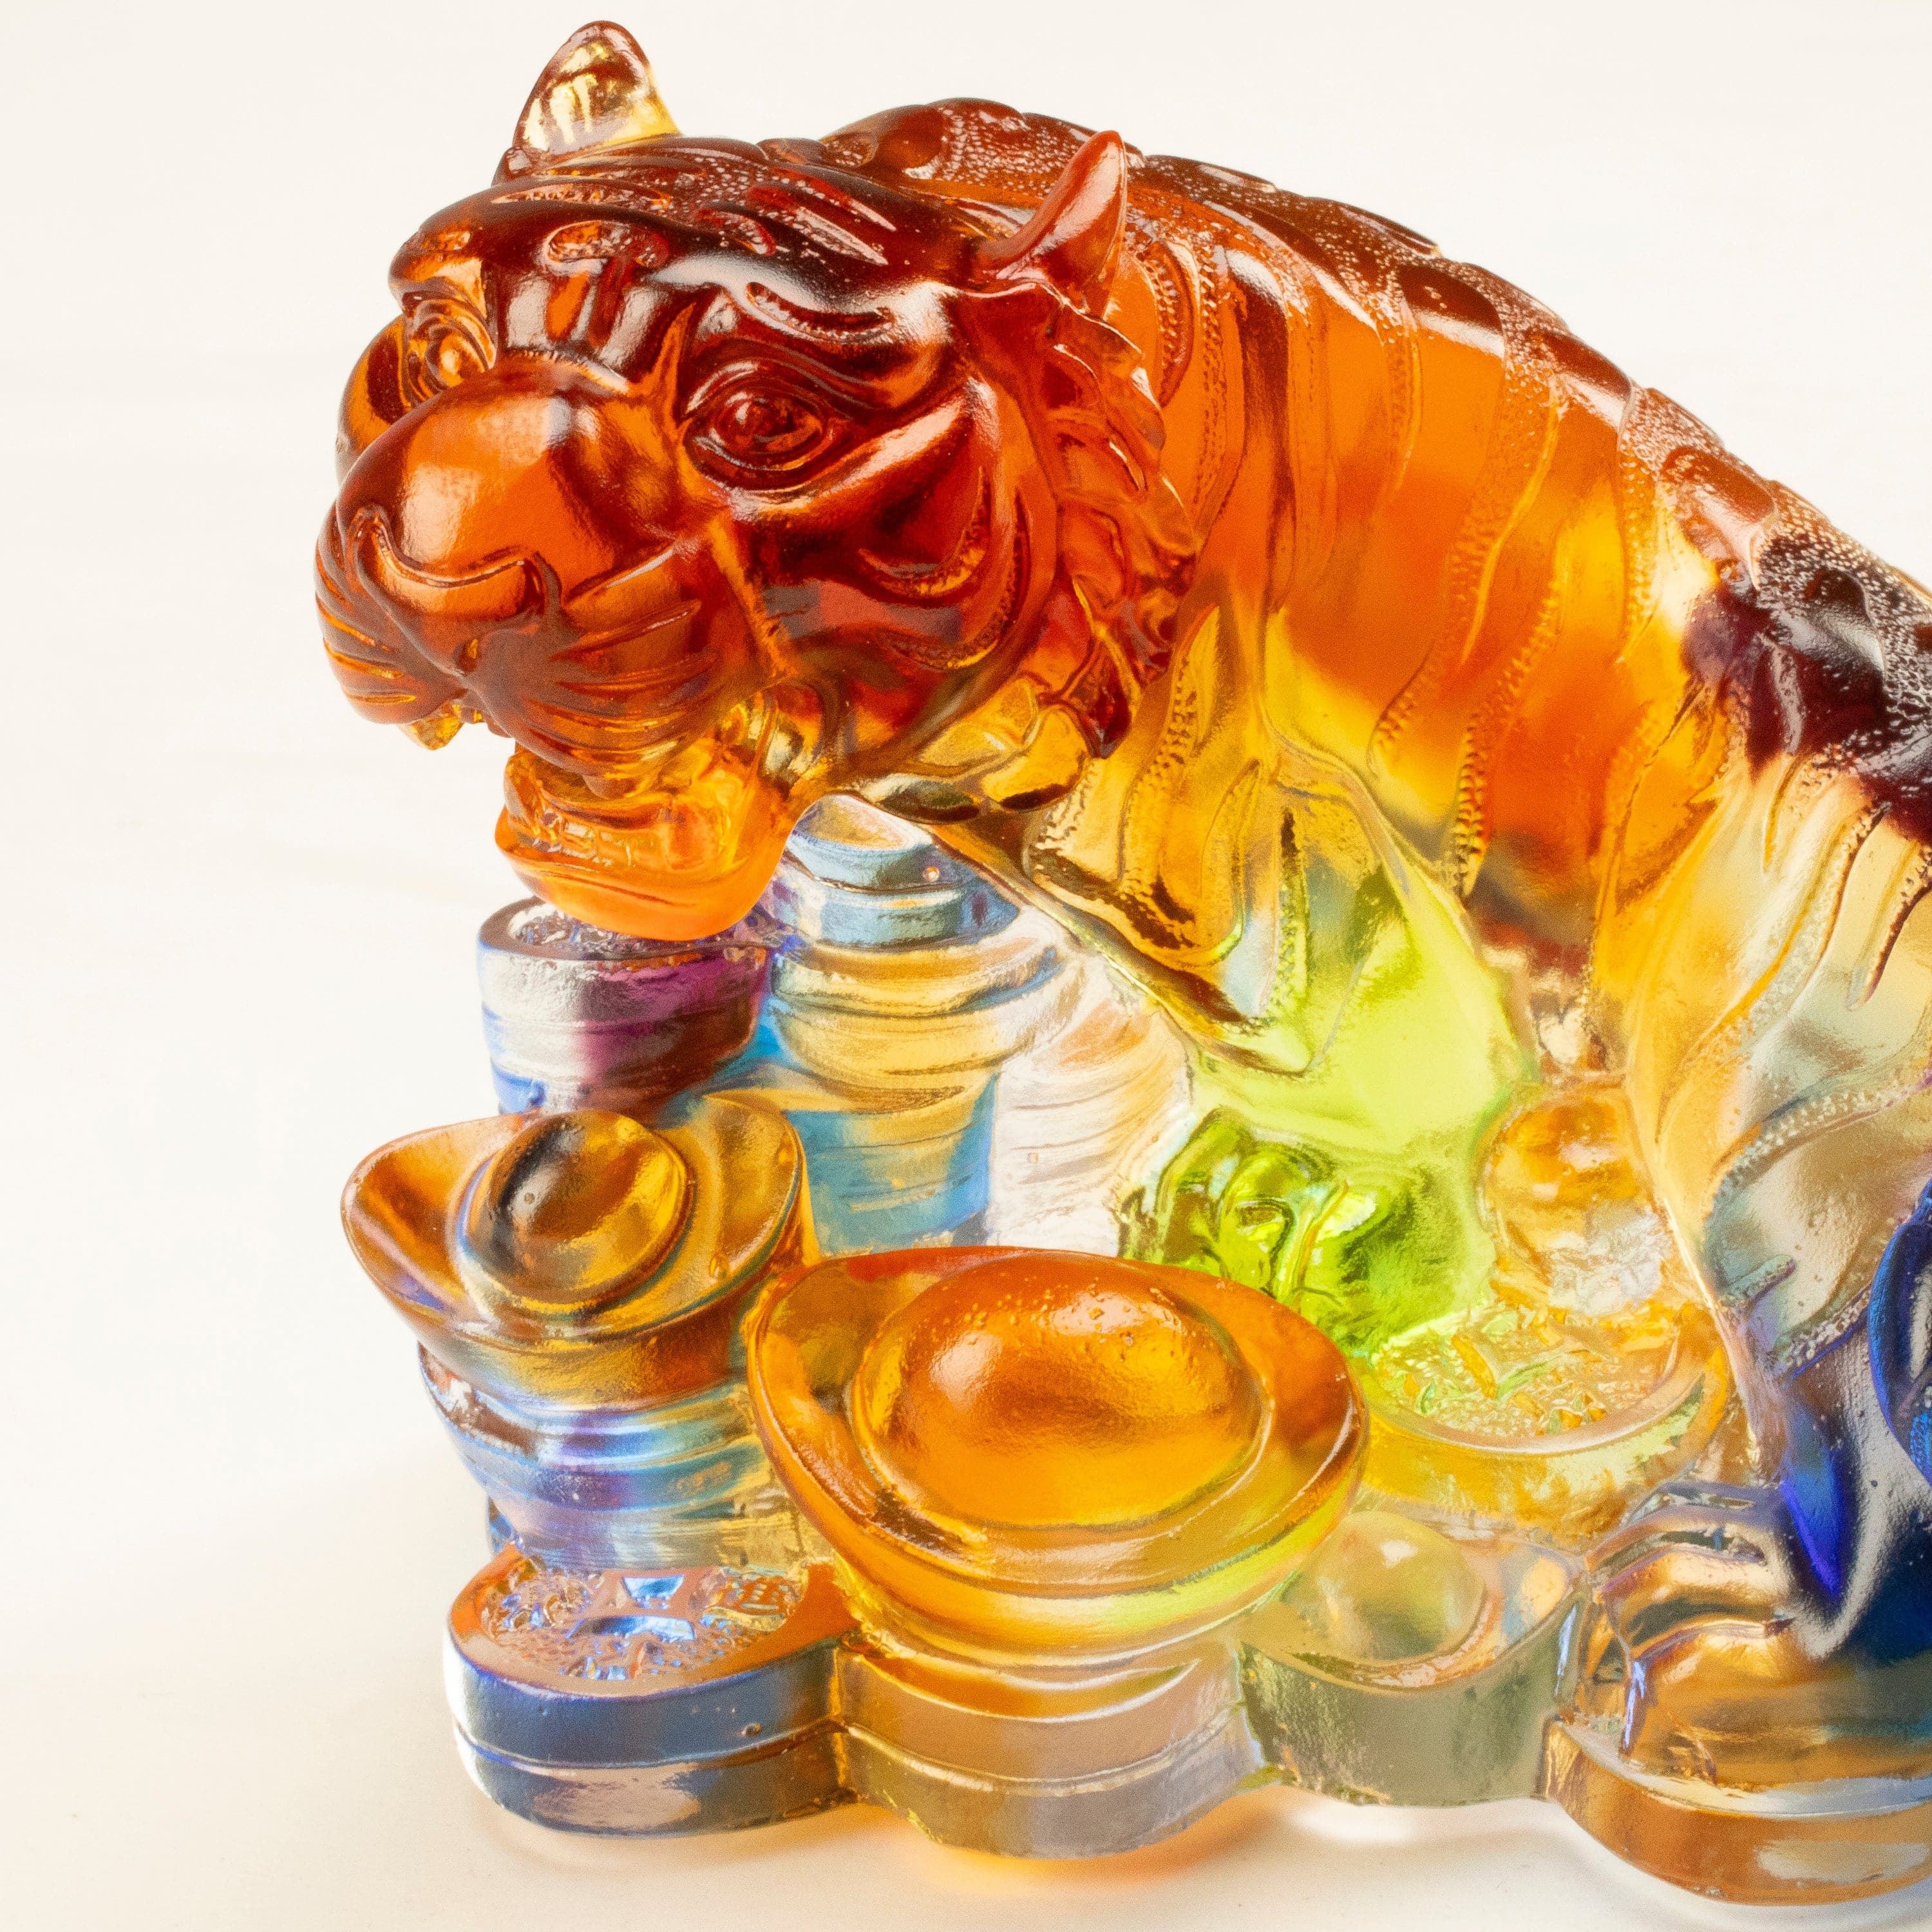 Kalifano Crystal Carving Roaring Tiger Crystal Carving - A Symbol of Courage and Strength CRZ210-TIG